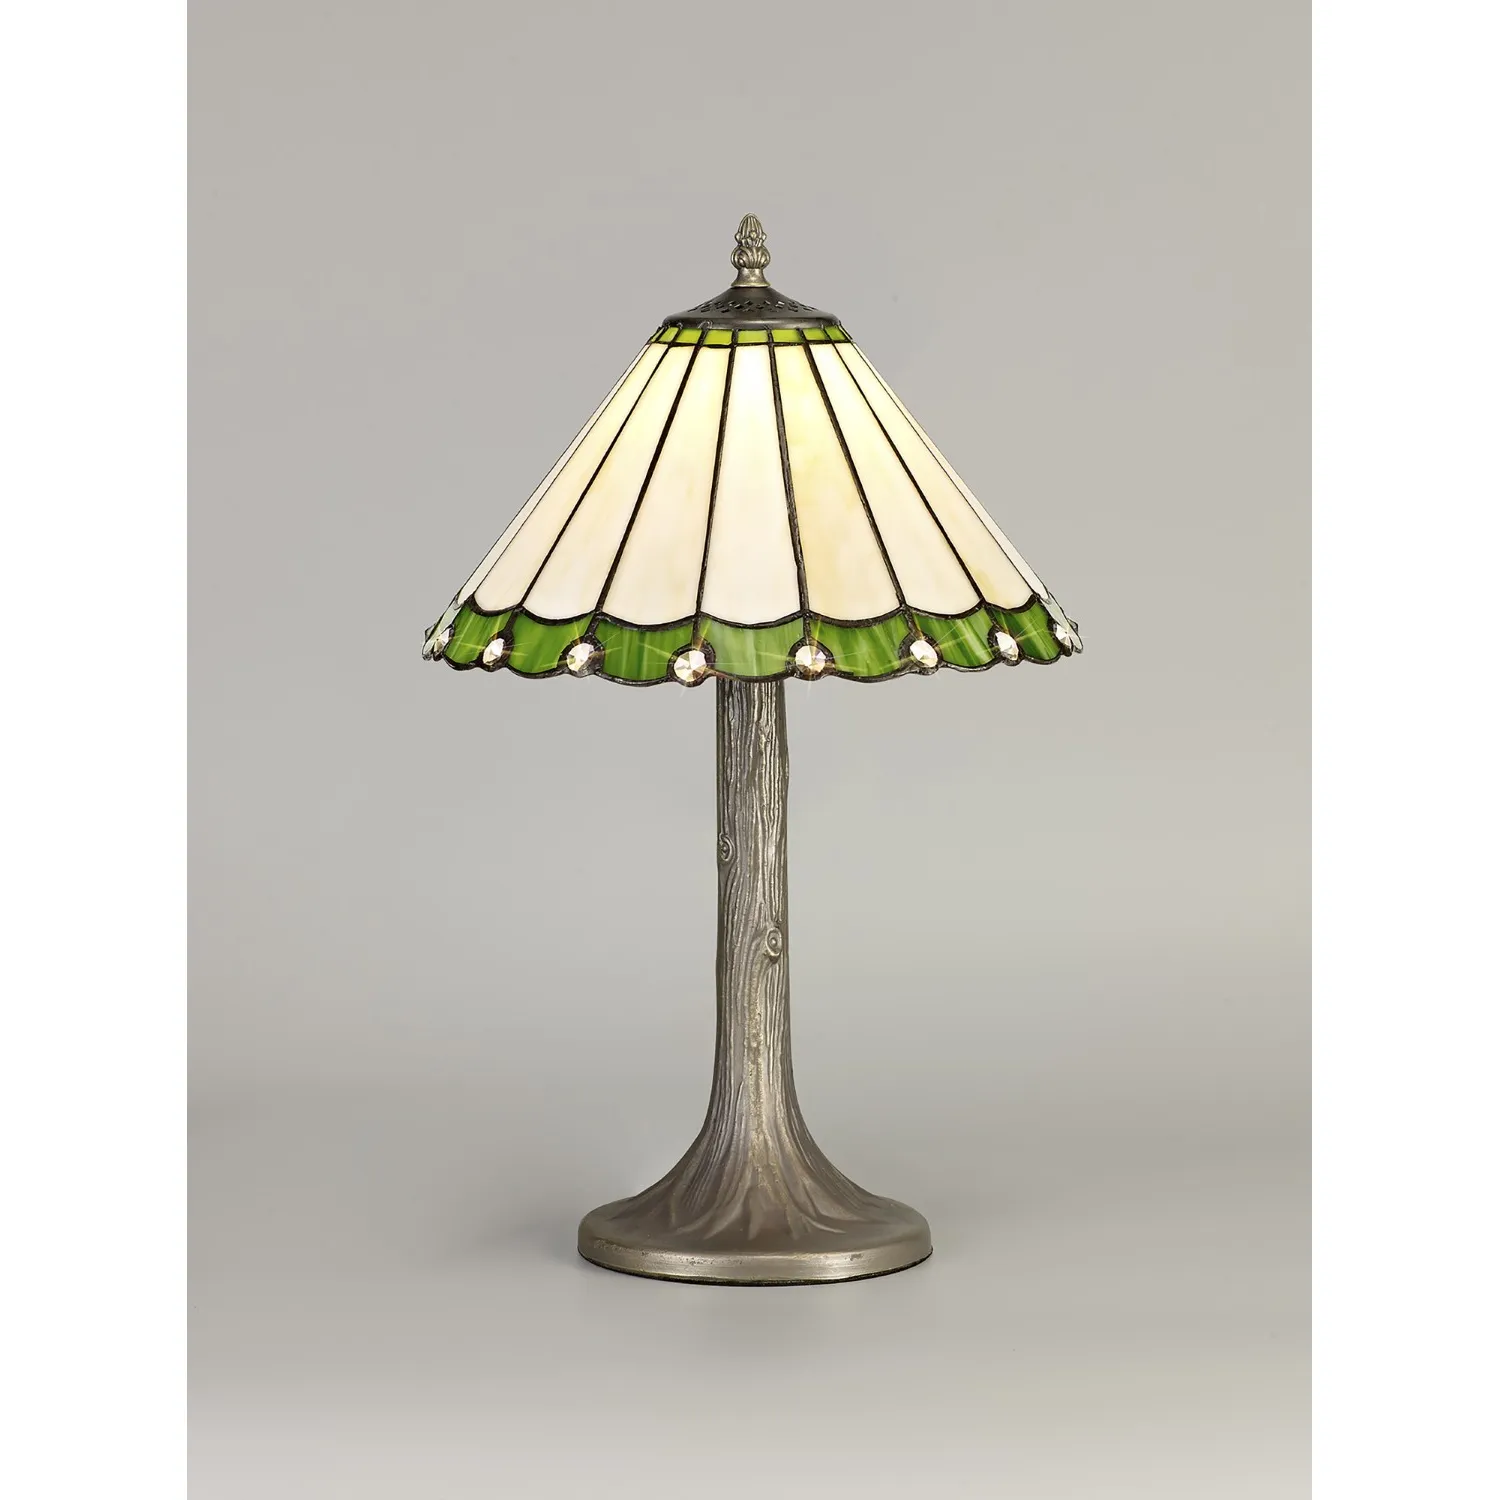 Ware 1 Light Tree Like Table Lamp E27 With 30cm Tiffany Shade, Green Cream Crystal Aged Antique Brass